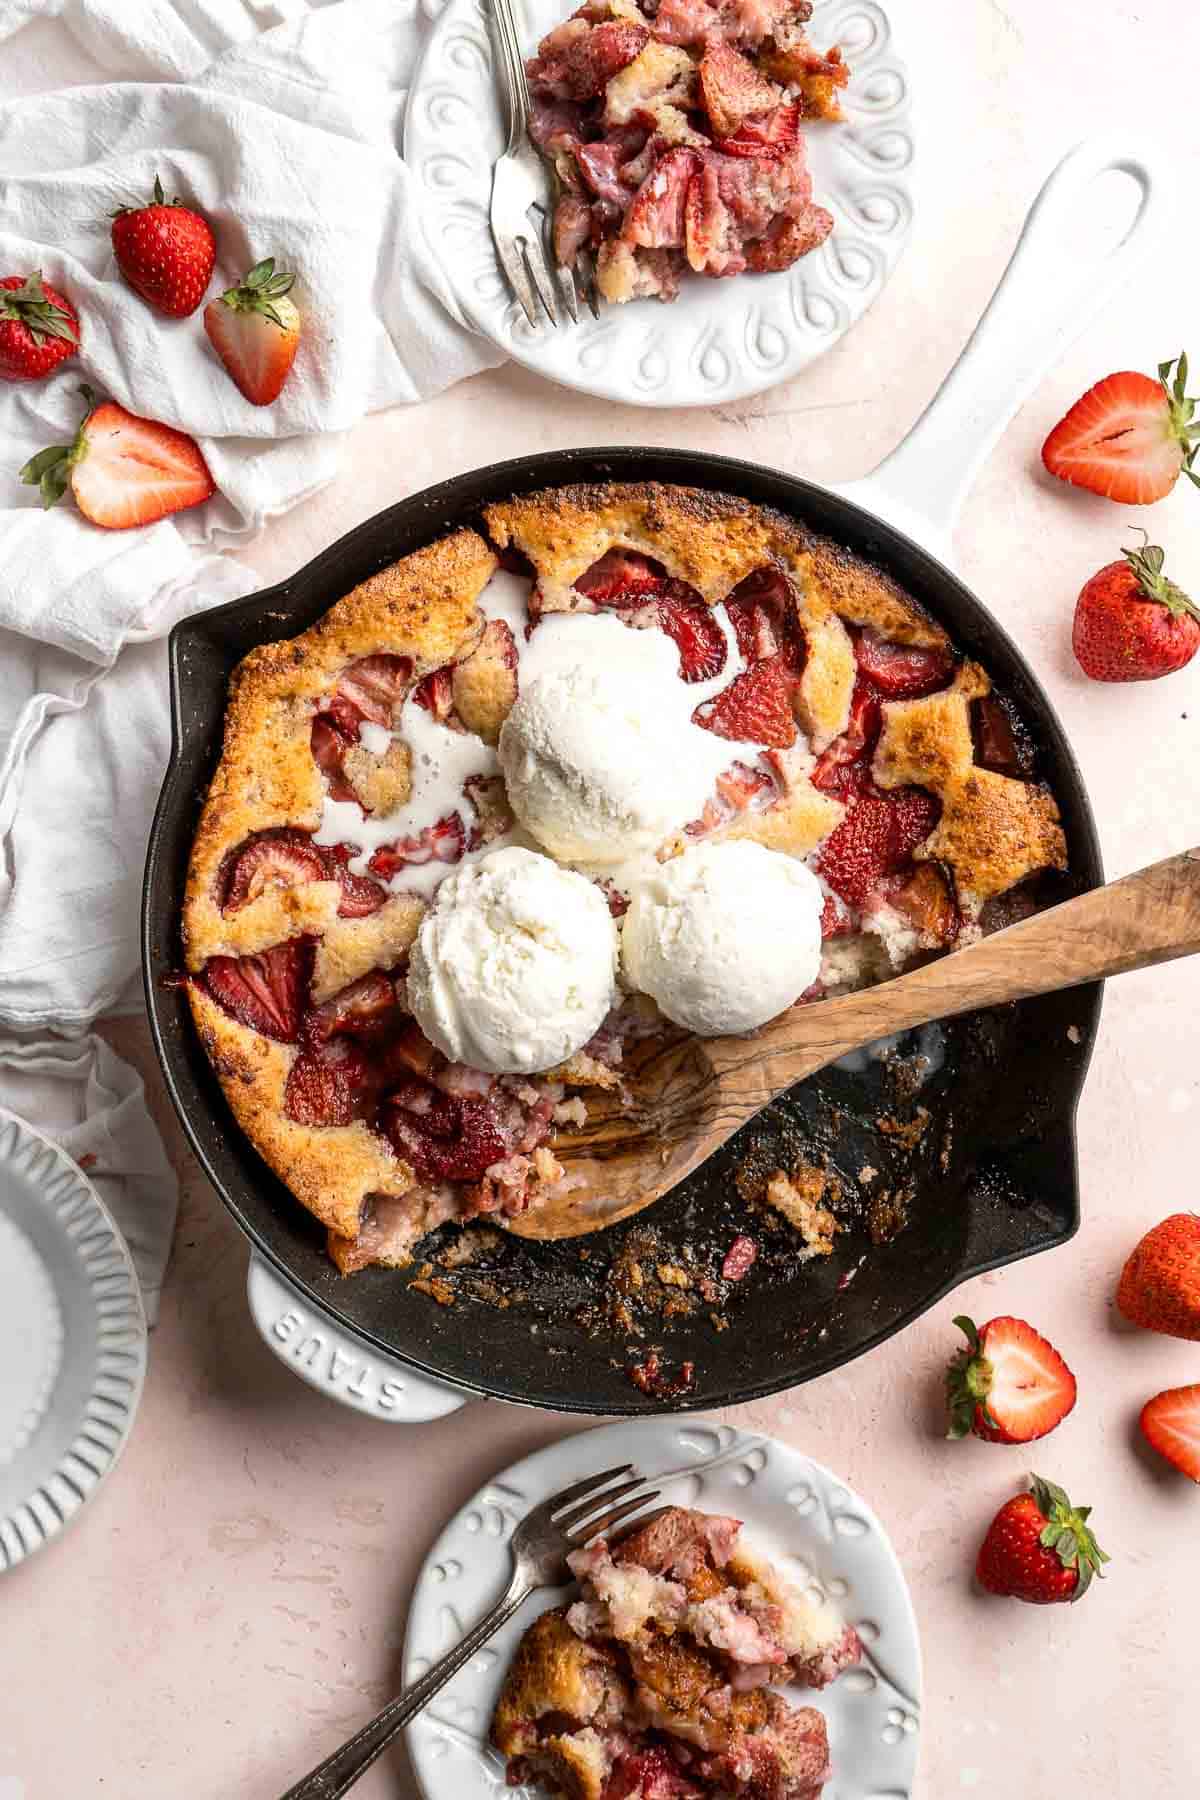 Strawberry Cobbler made with sweet, gooey strawberries and light, fluffy cakey batter is an easy summer dessert to make from scratch with 10 minutes prep. | aheadofthyme.com